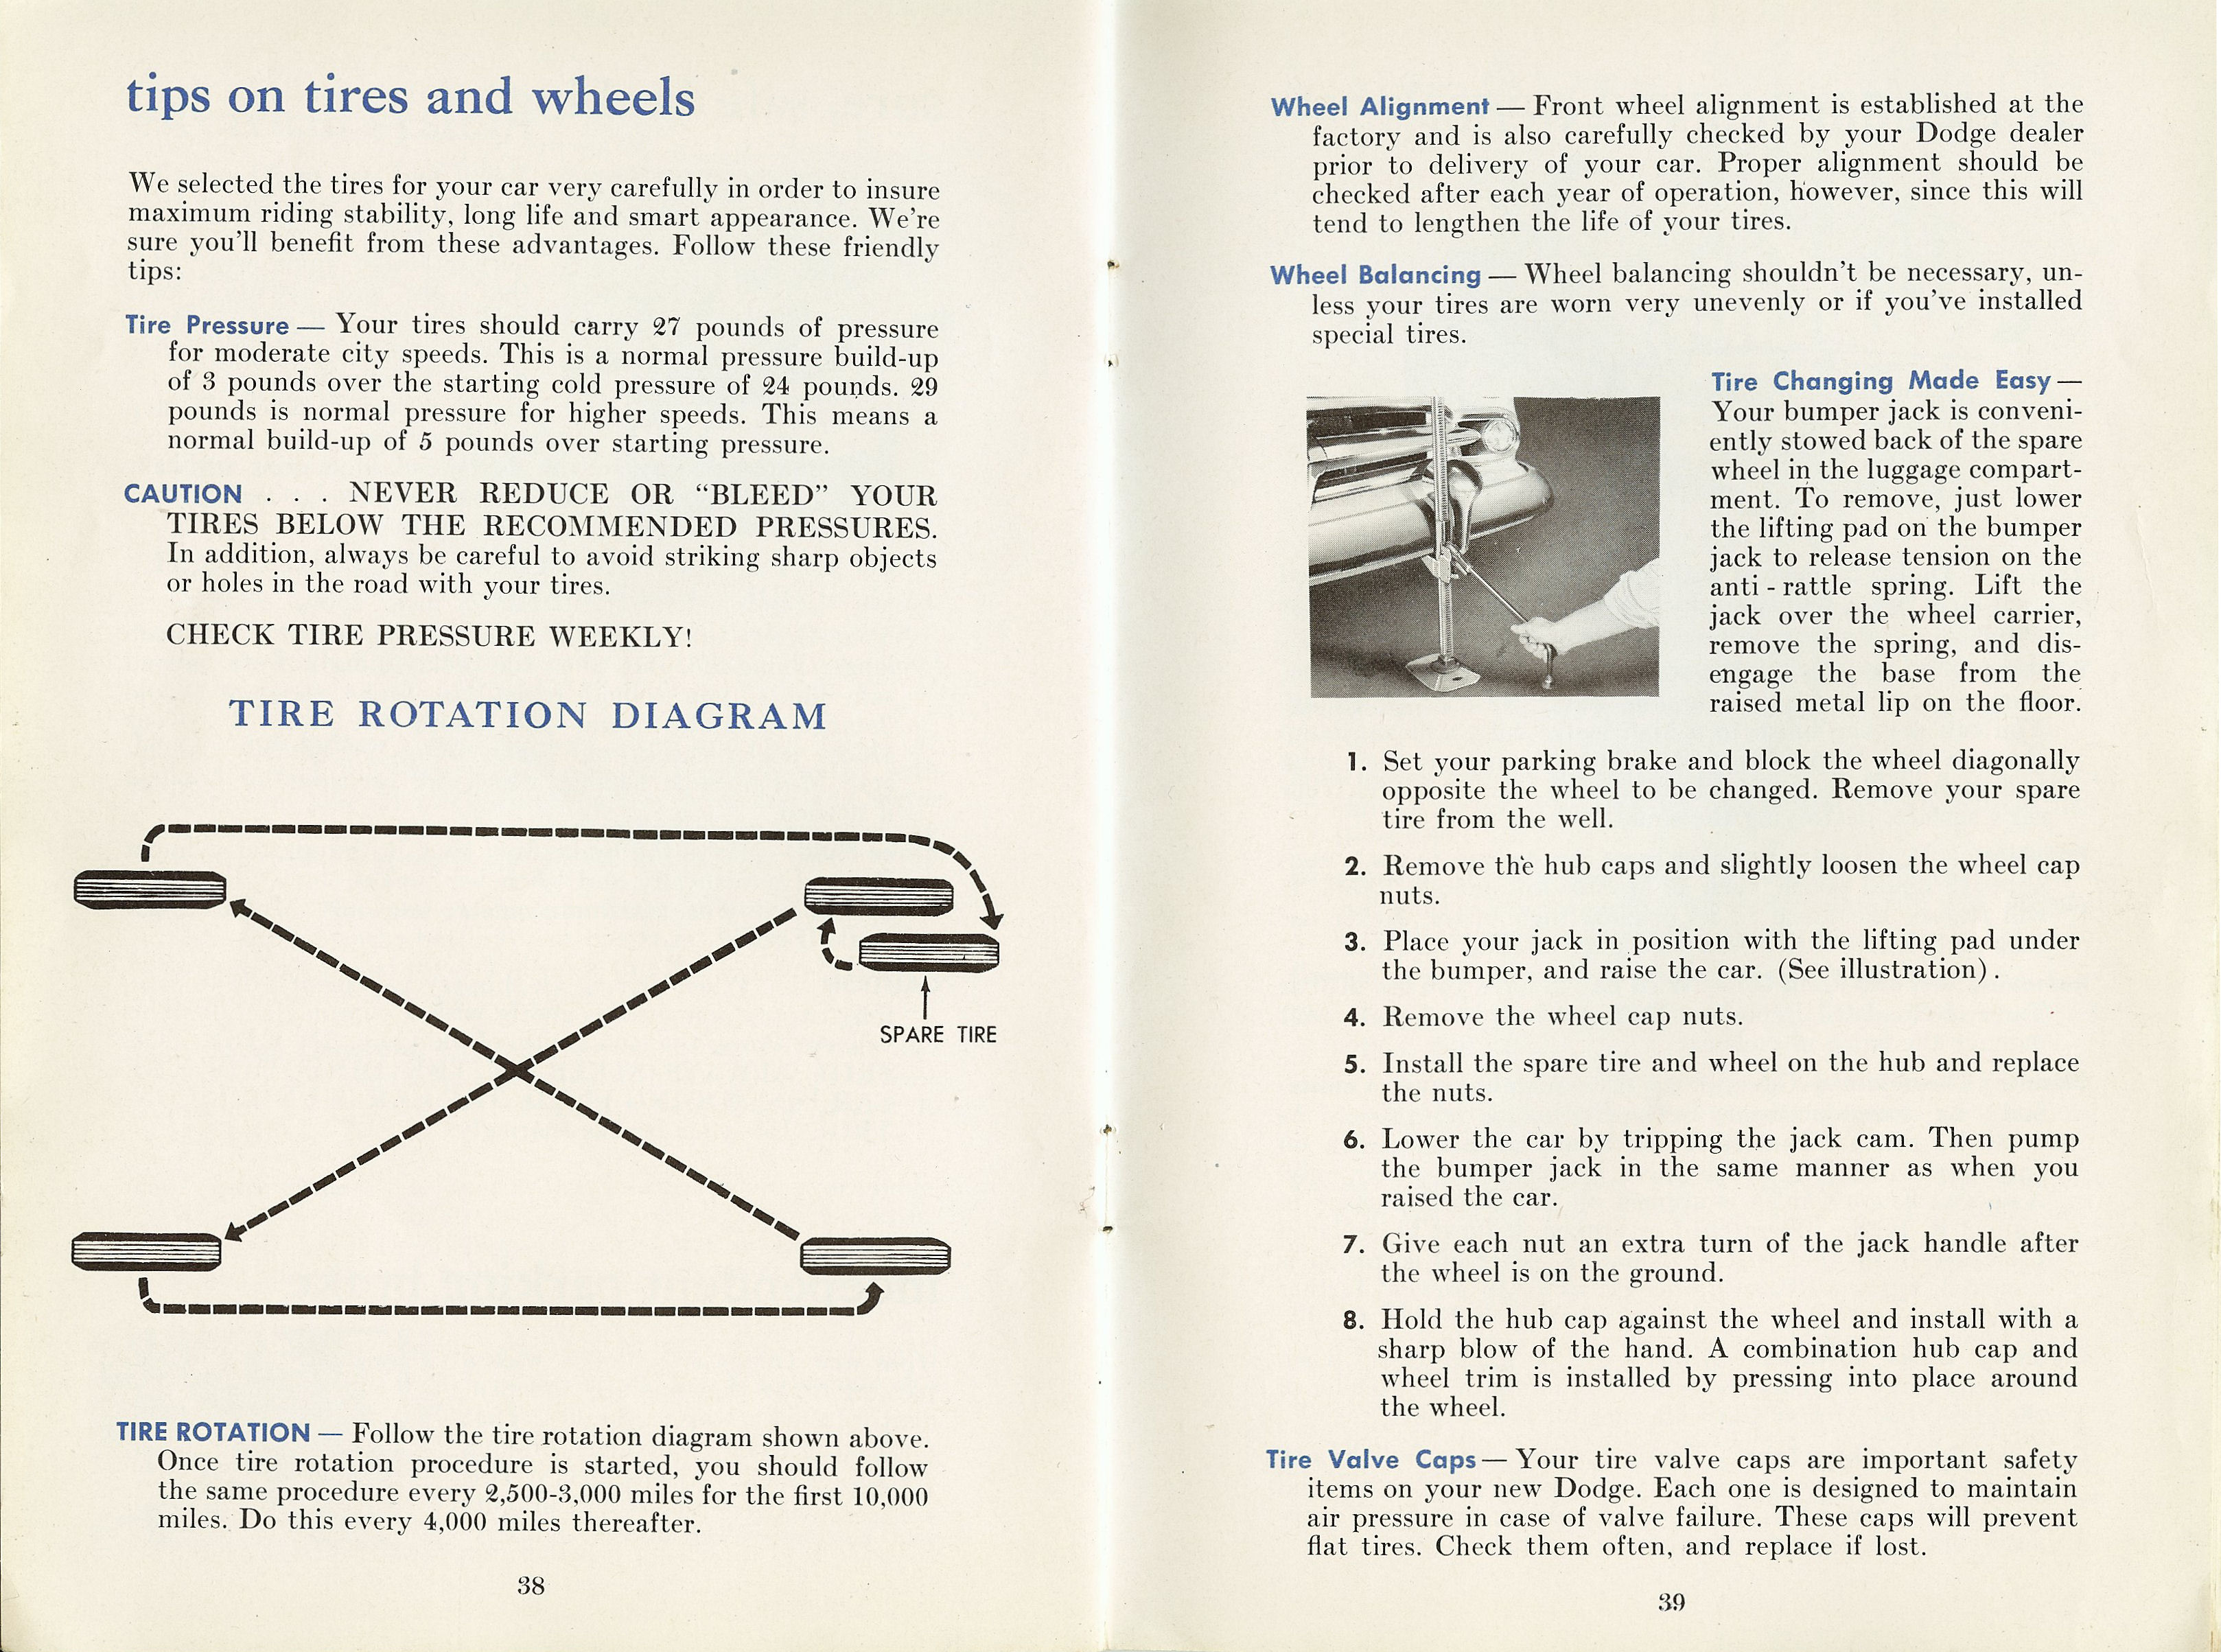 1954_Dodge_Owners_Manual-38-39